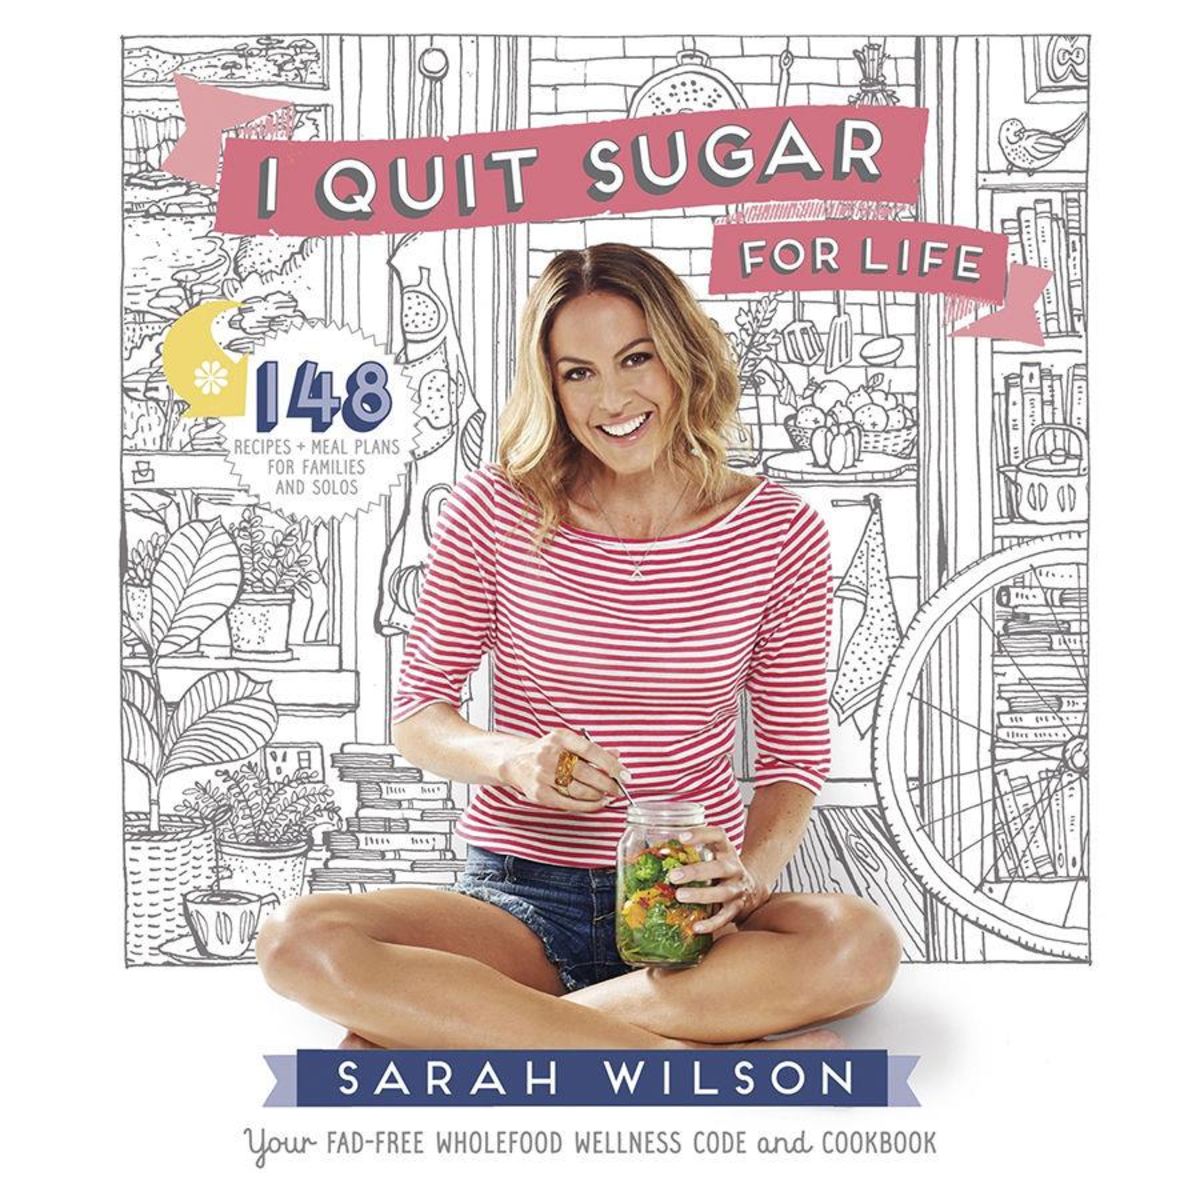 I Quit Sugar For Life By Sarah Wilson - Book